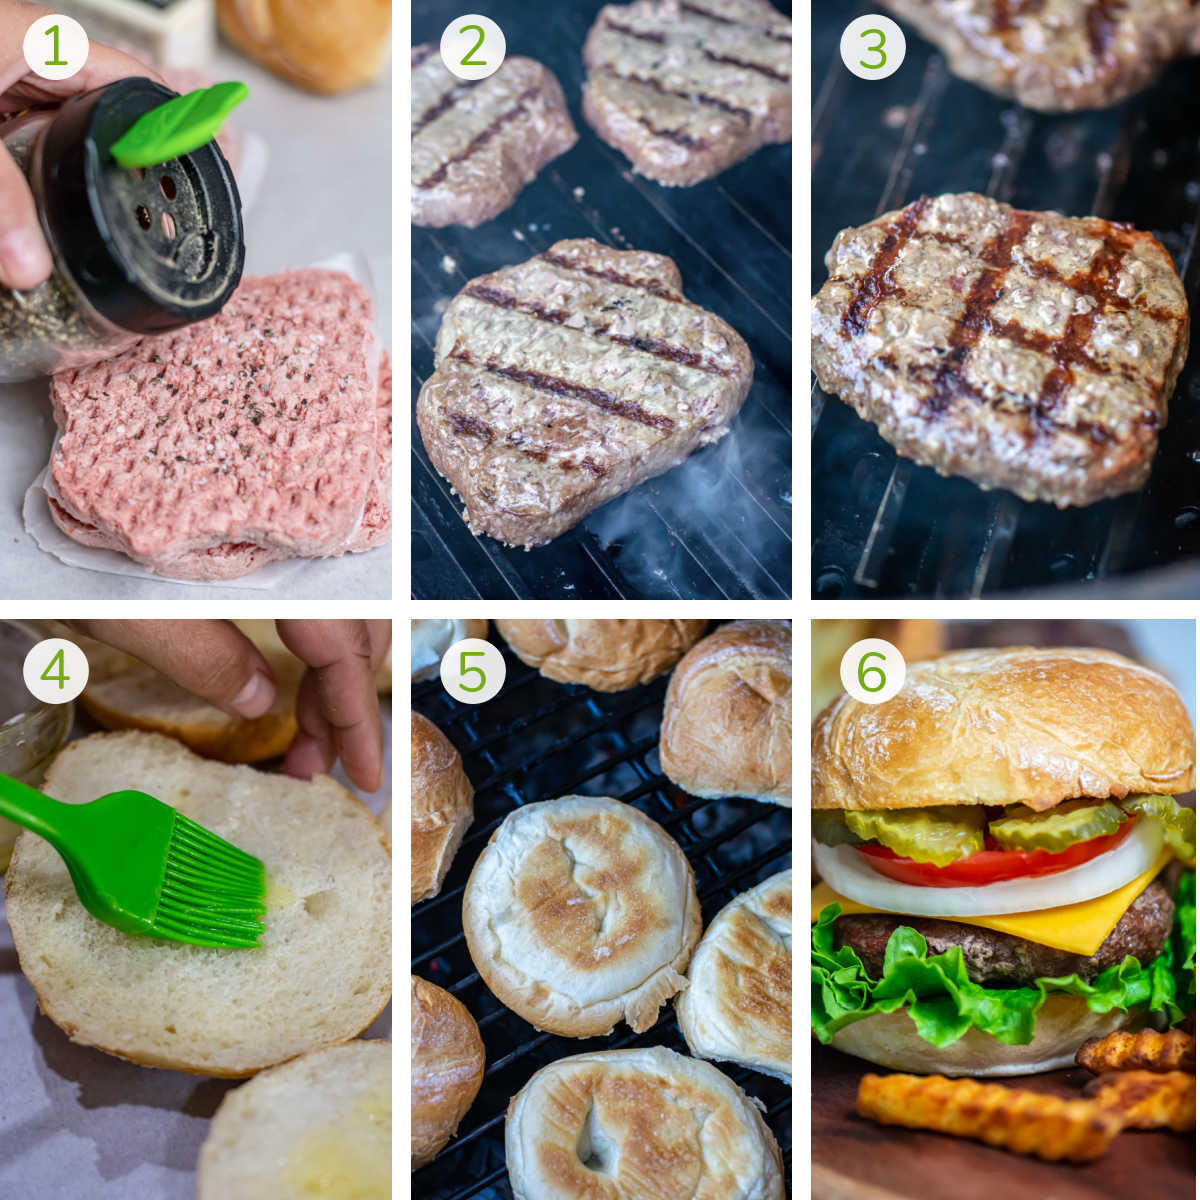 process photos showing seasoning the frozen patty, grilling it, toasting the bun and making the sandwich.